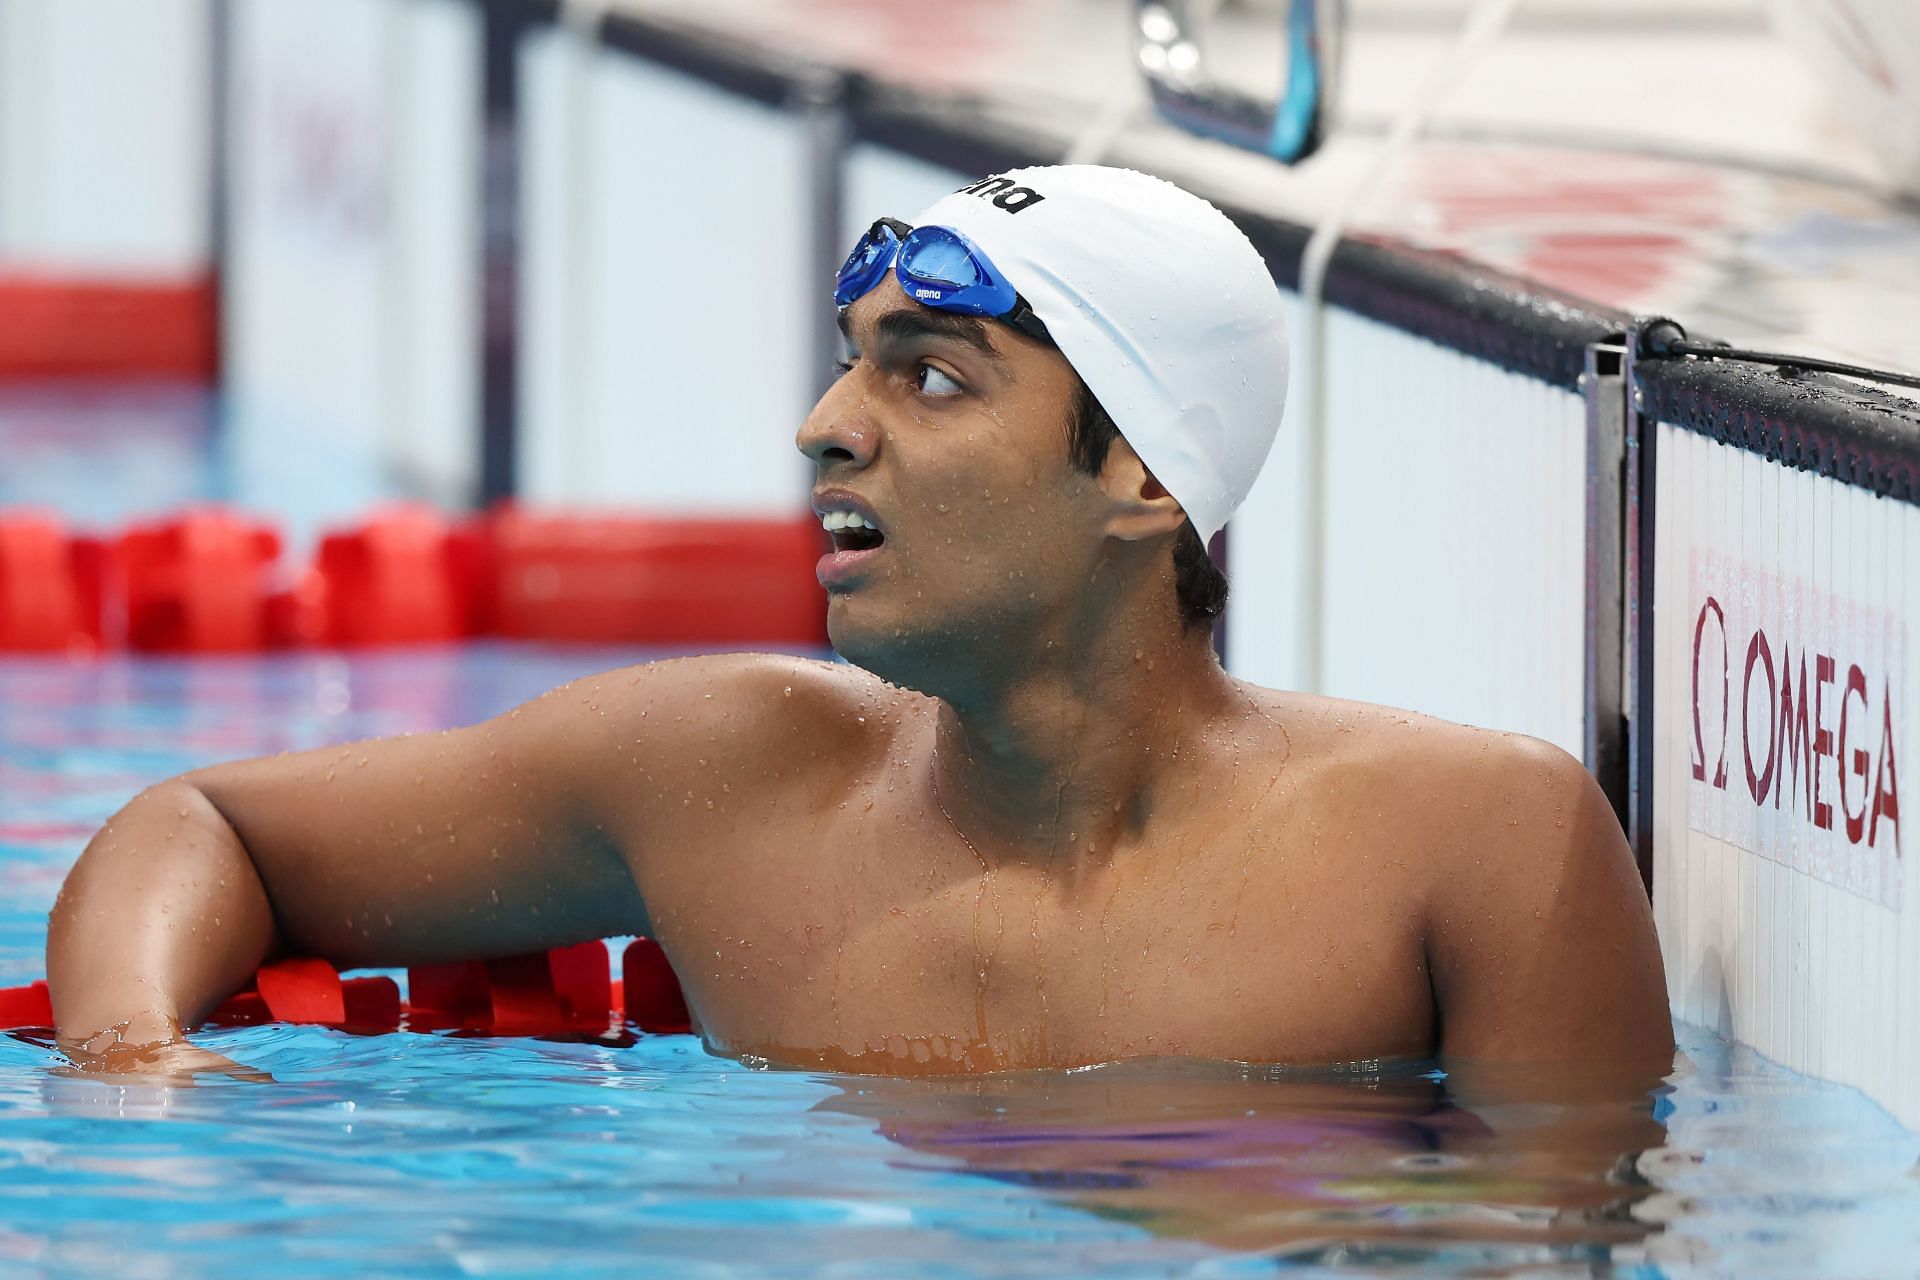 Indian swimmer Srihari Nataraj at the recently concluded Tokyo Olympics. (PC: Getty Images)